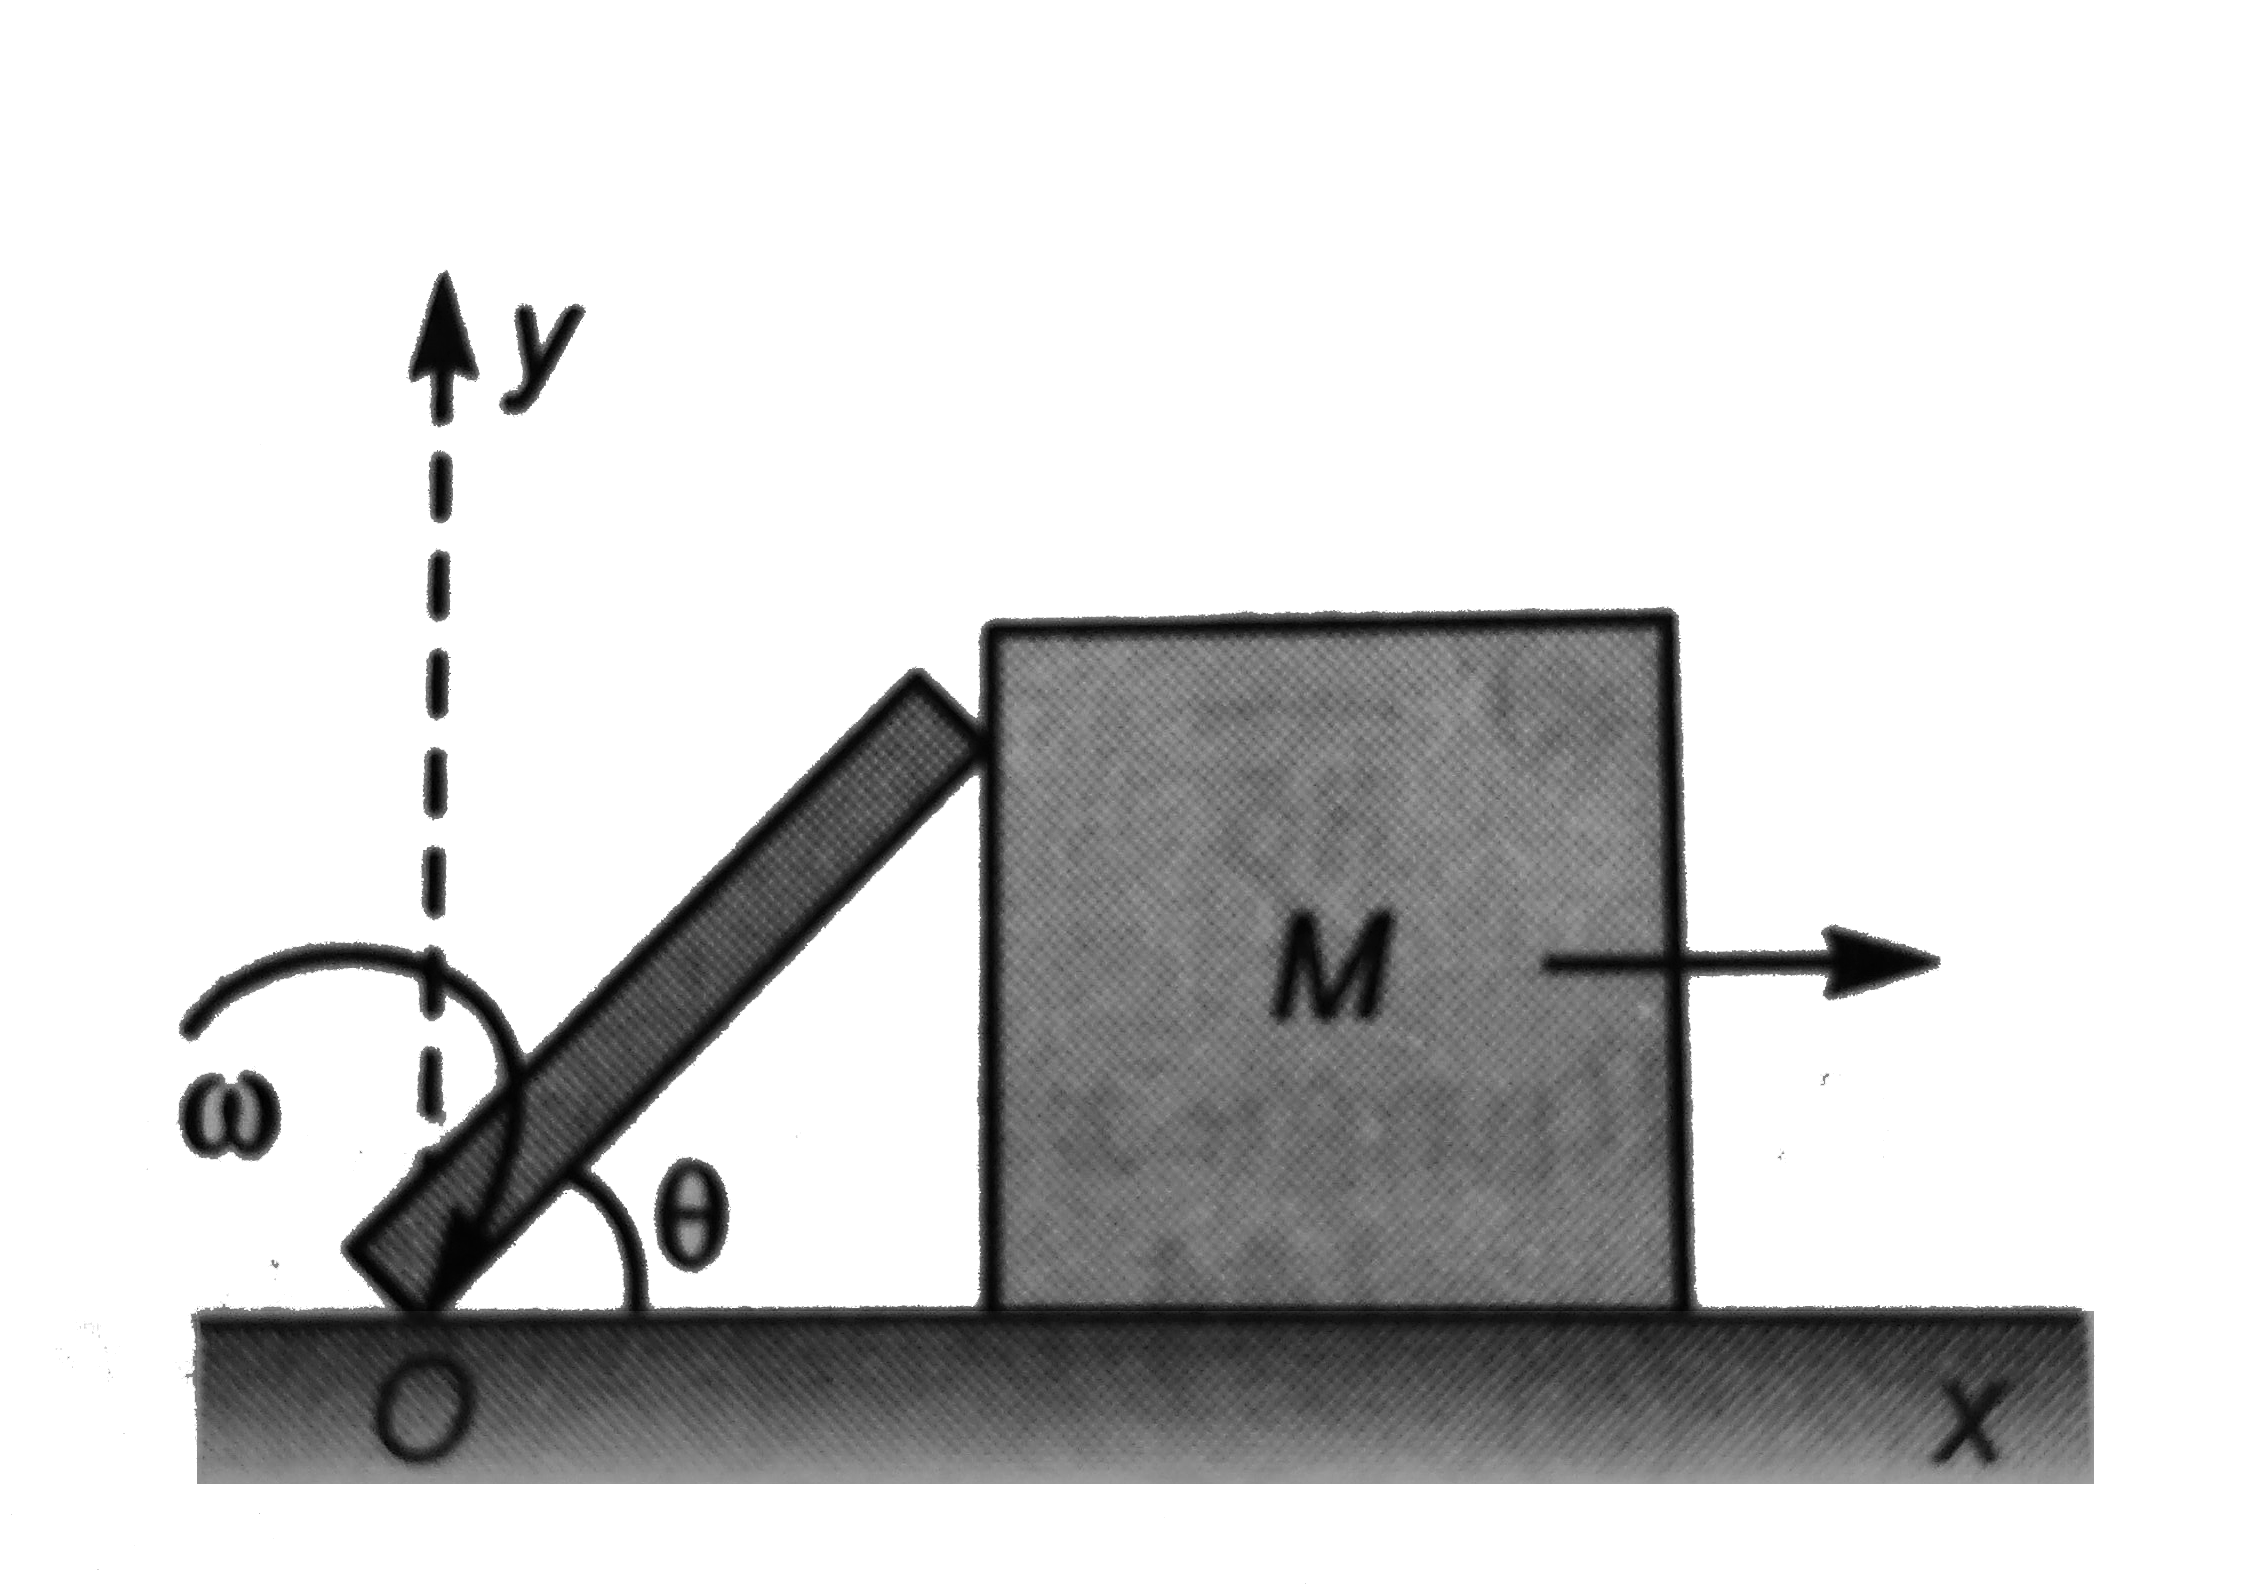 A uniform rod of mass m and length l is applied pivoted at point O. The rod is initially in vertical position and touching a block of mass M which is at rest on a horizontal surface. The rod is given a slight jerk and it starts rotating about point O this causes the block to move forward as shown The rod loses contact with the block at theta=30^(@) all surfaces are smooth now answer the following questions.   Q. The hinge reaction at O on the rod when it loses contact with the block is